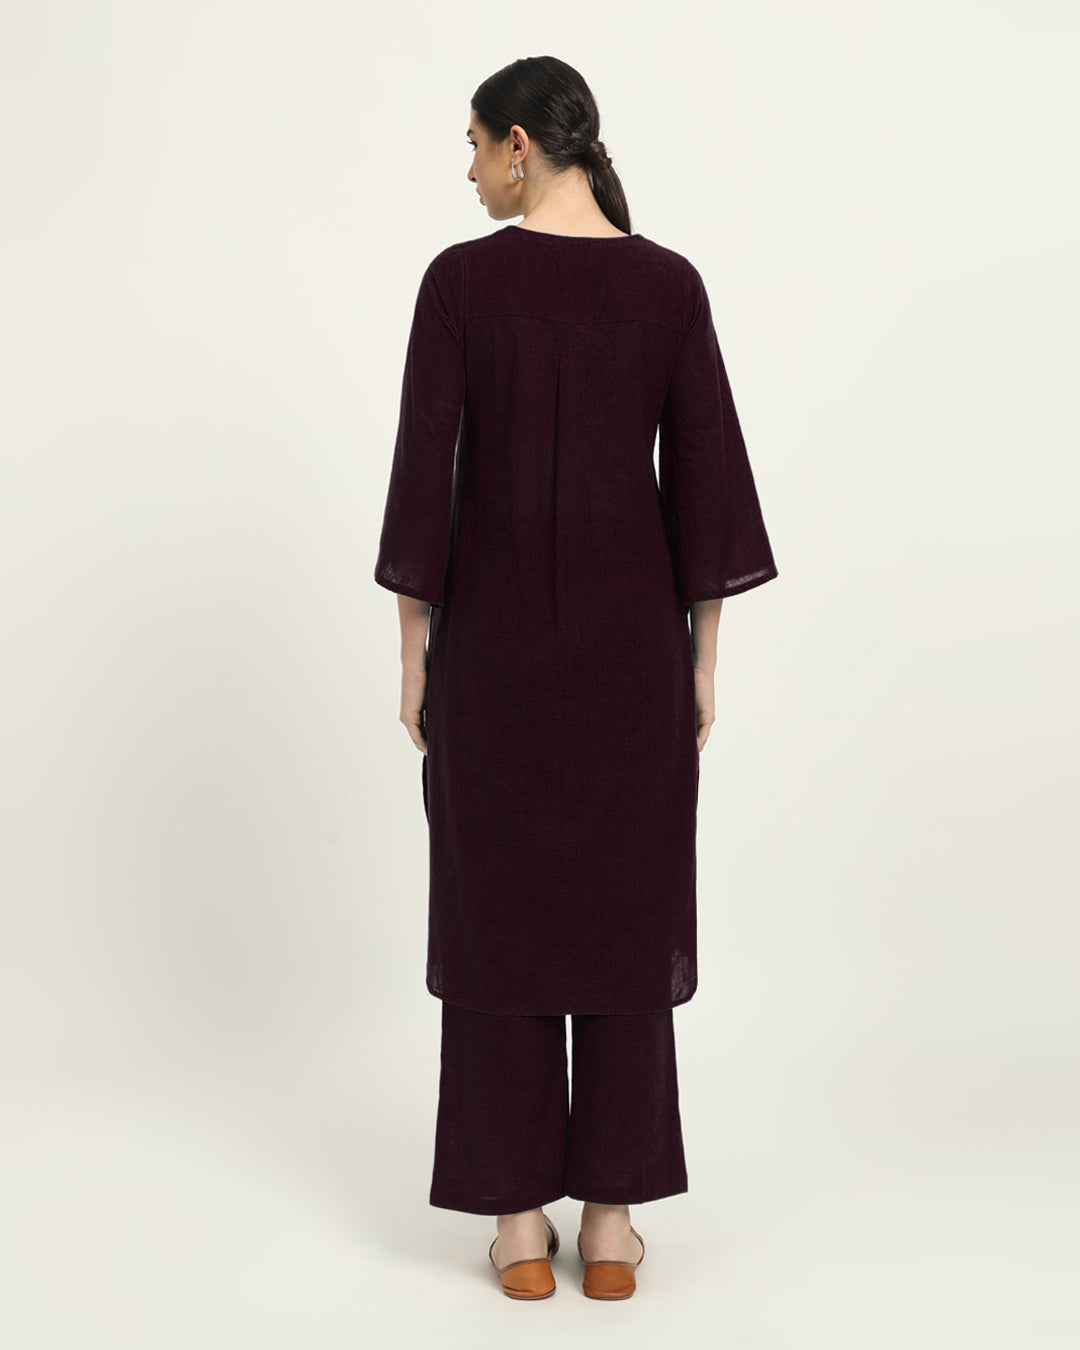 Plum Passion Rounded Reverie Solid Kurta (Without Bottoms)